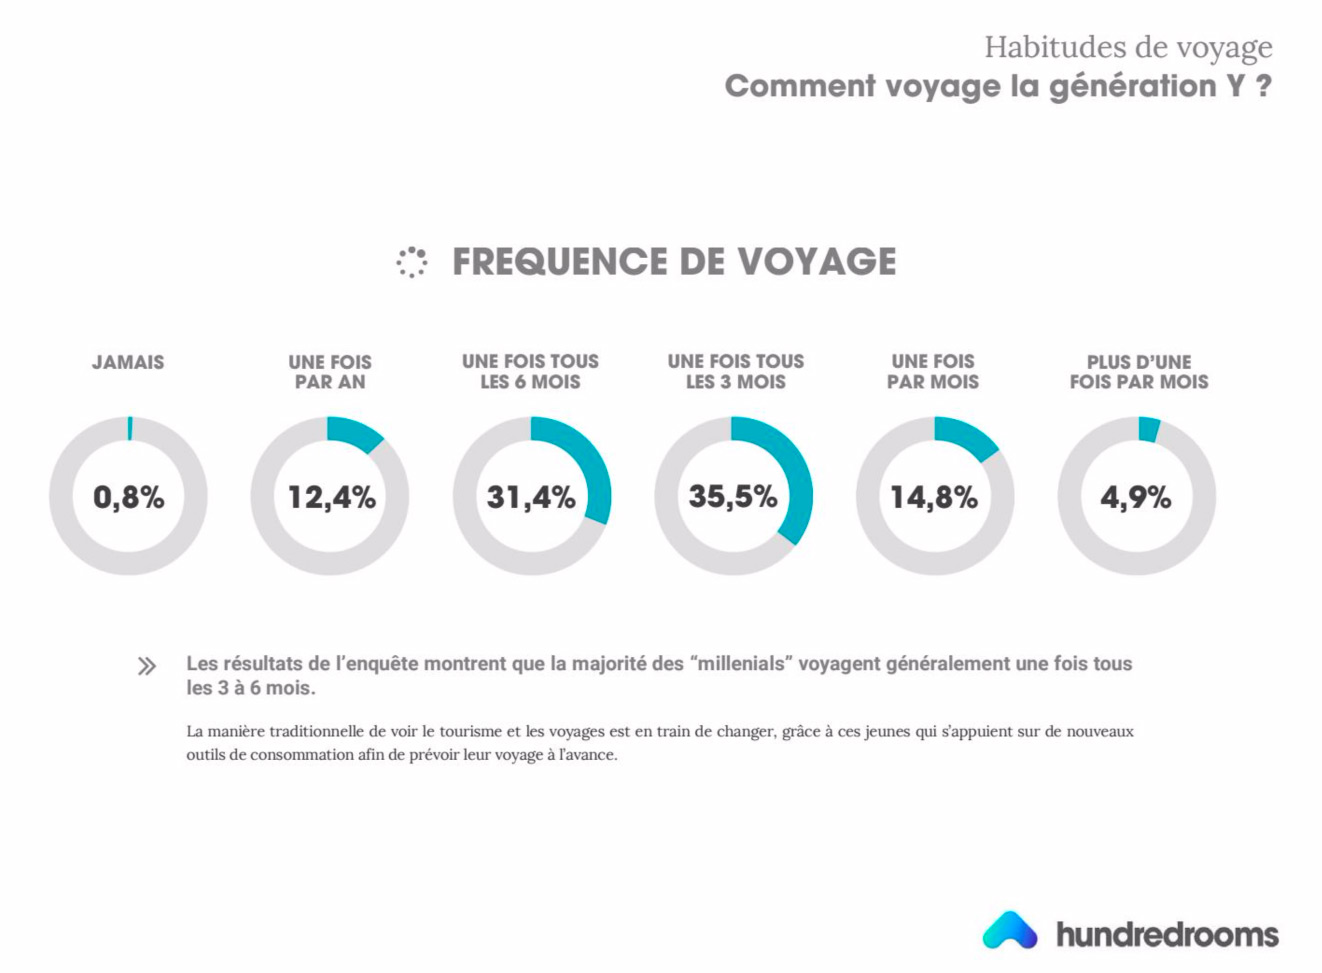 hundredrooms-infographie-voyage-generation-y-7